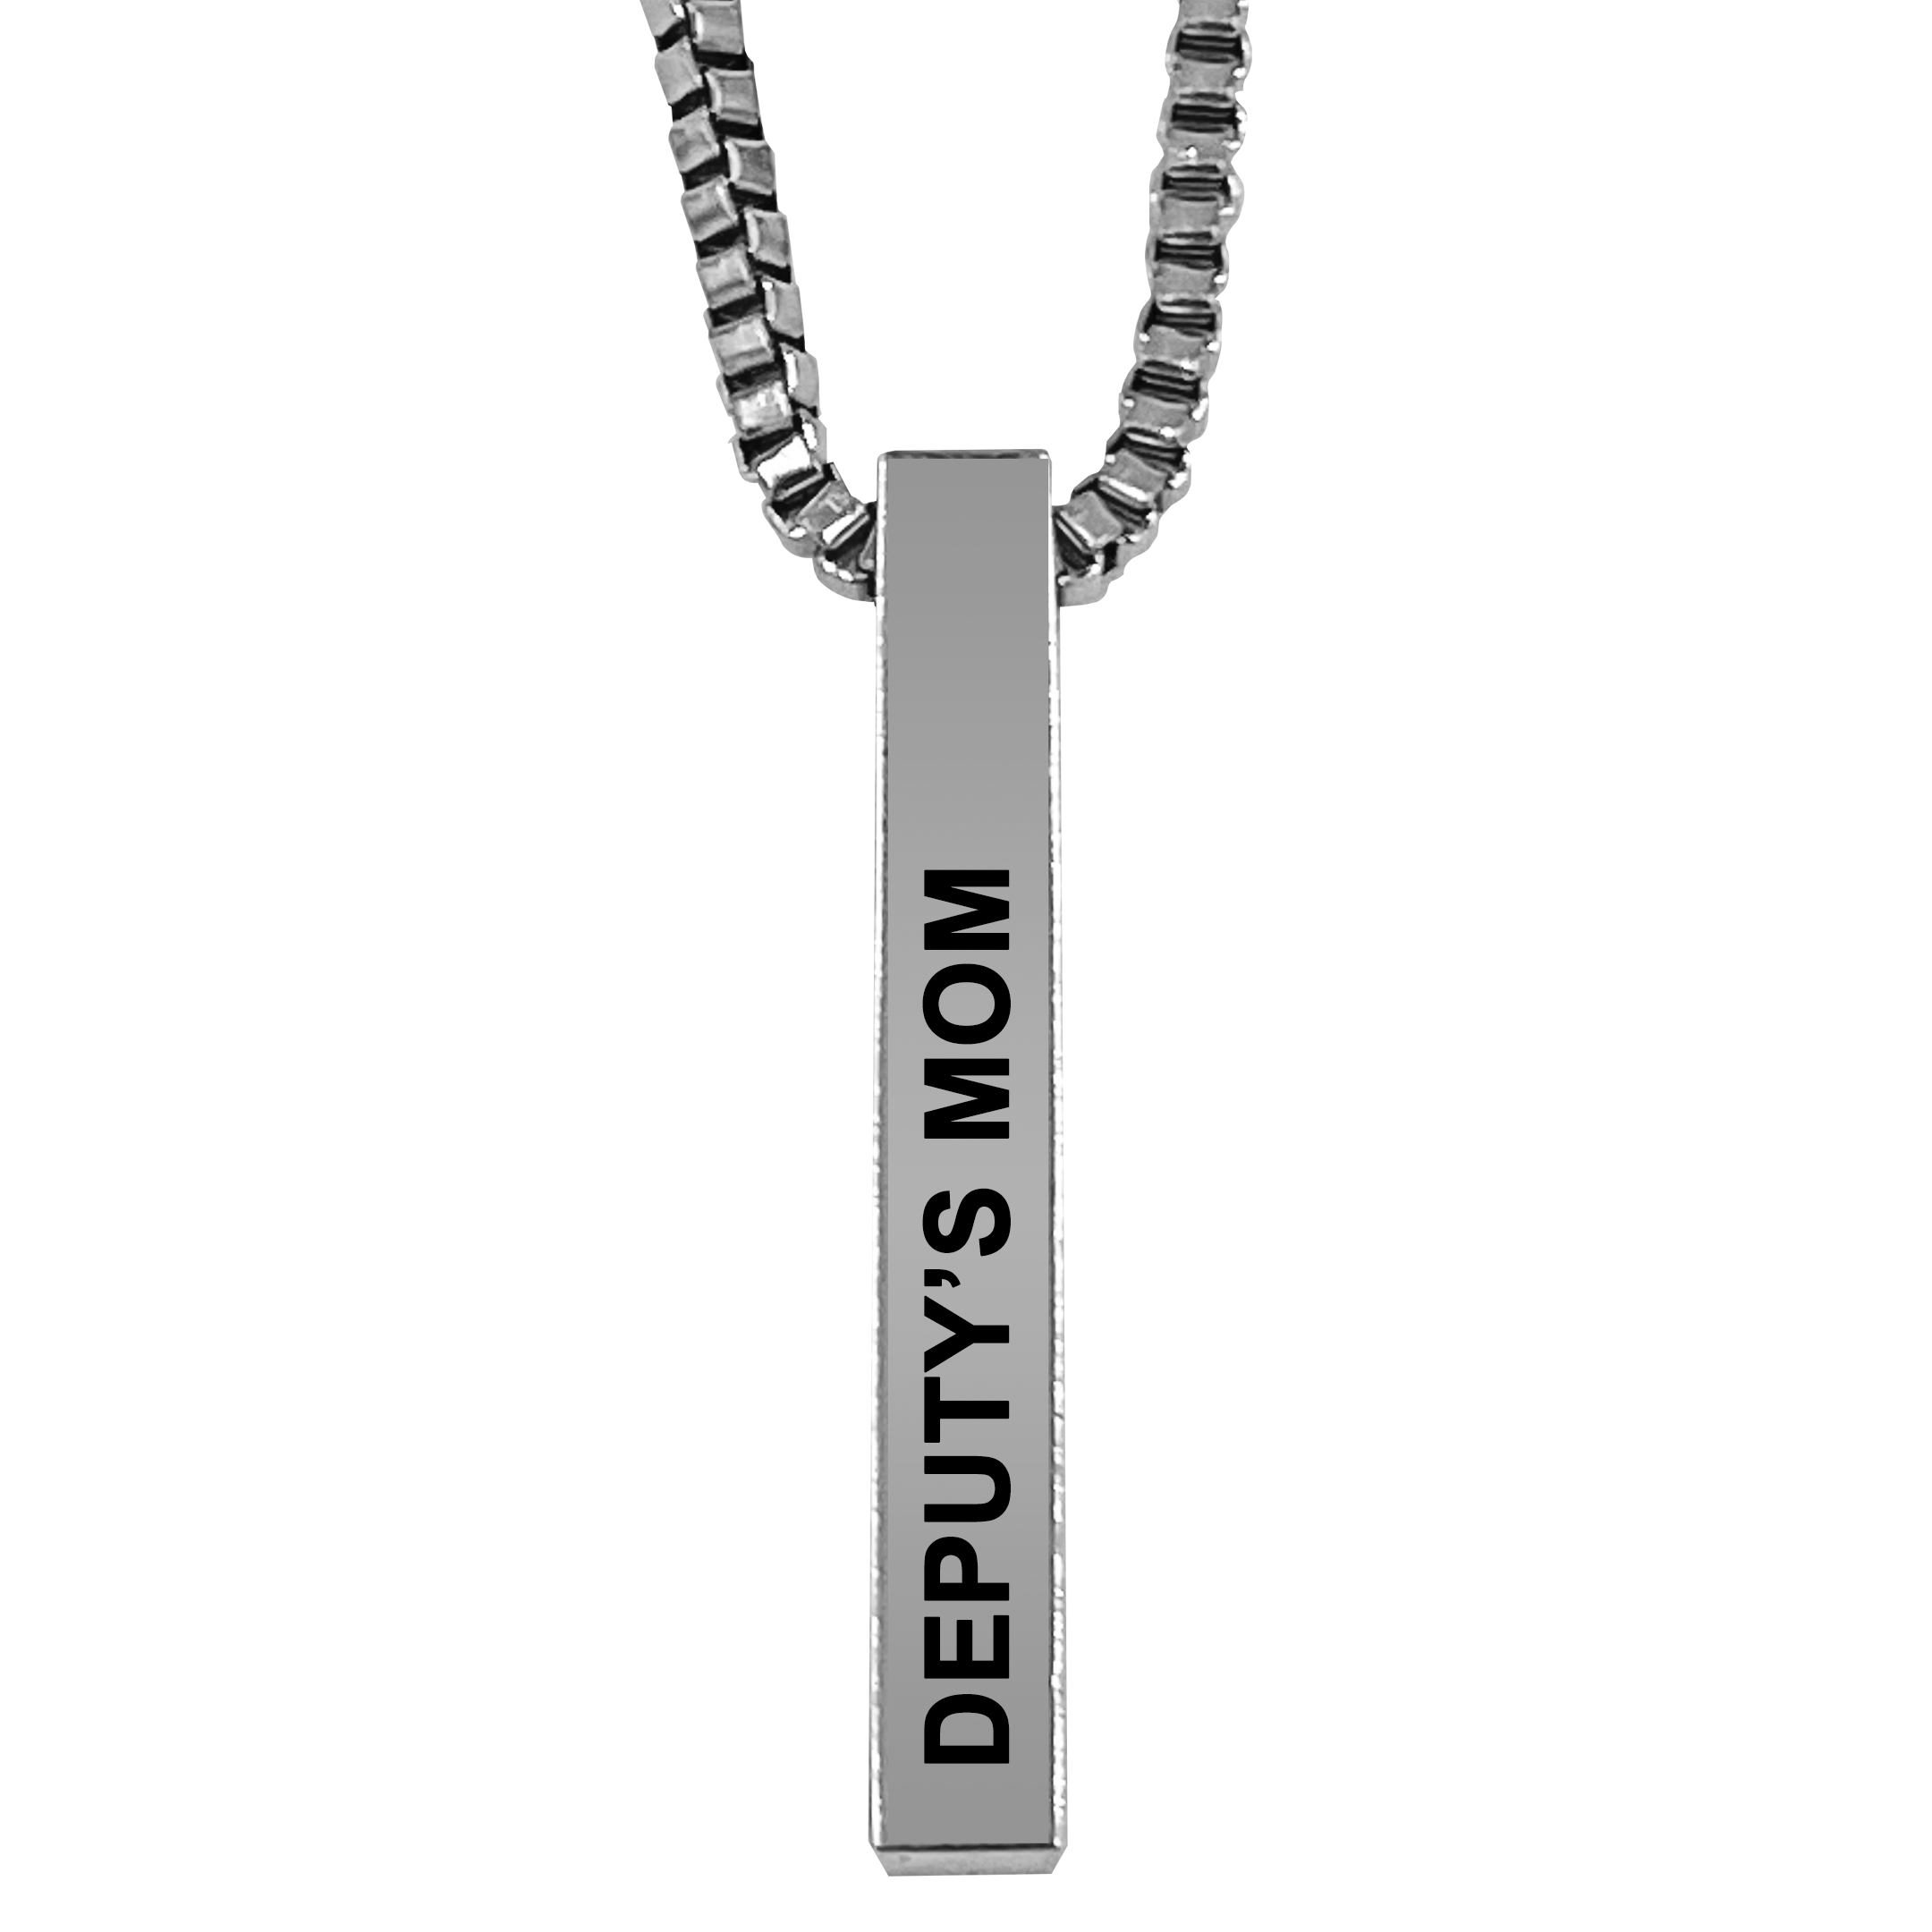 Deputy's Mom Silver Plated Pillar Bar Pendant Necklace Gift Mother's Day Christmas Holiday Anniversary Police Sheriff Officer First Responder Law Enforcement